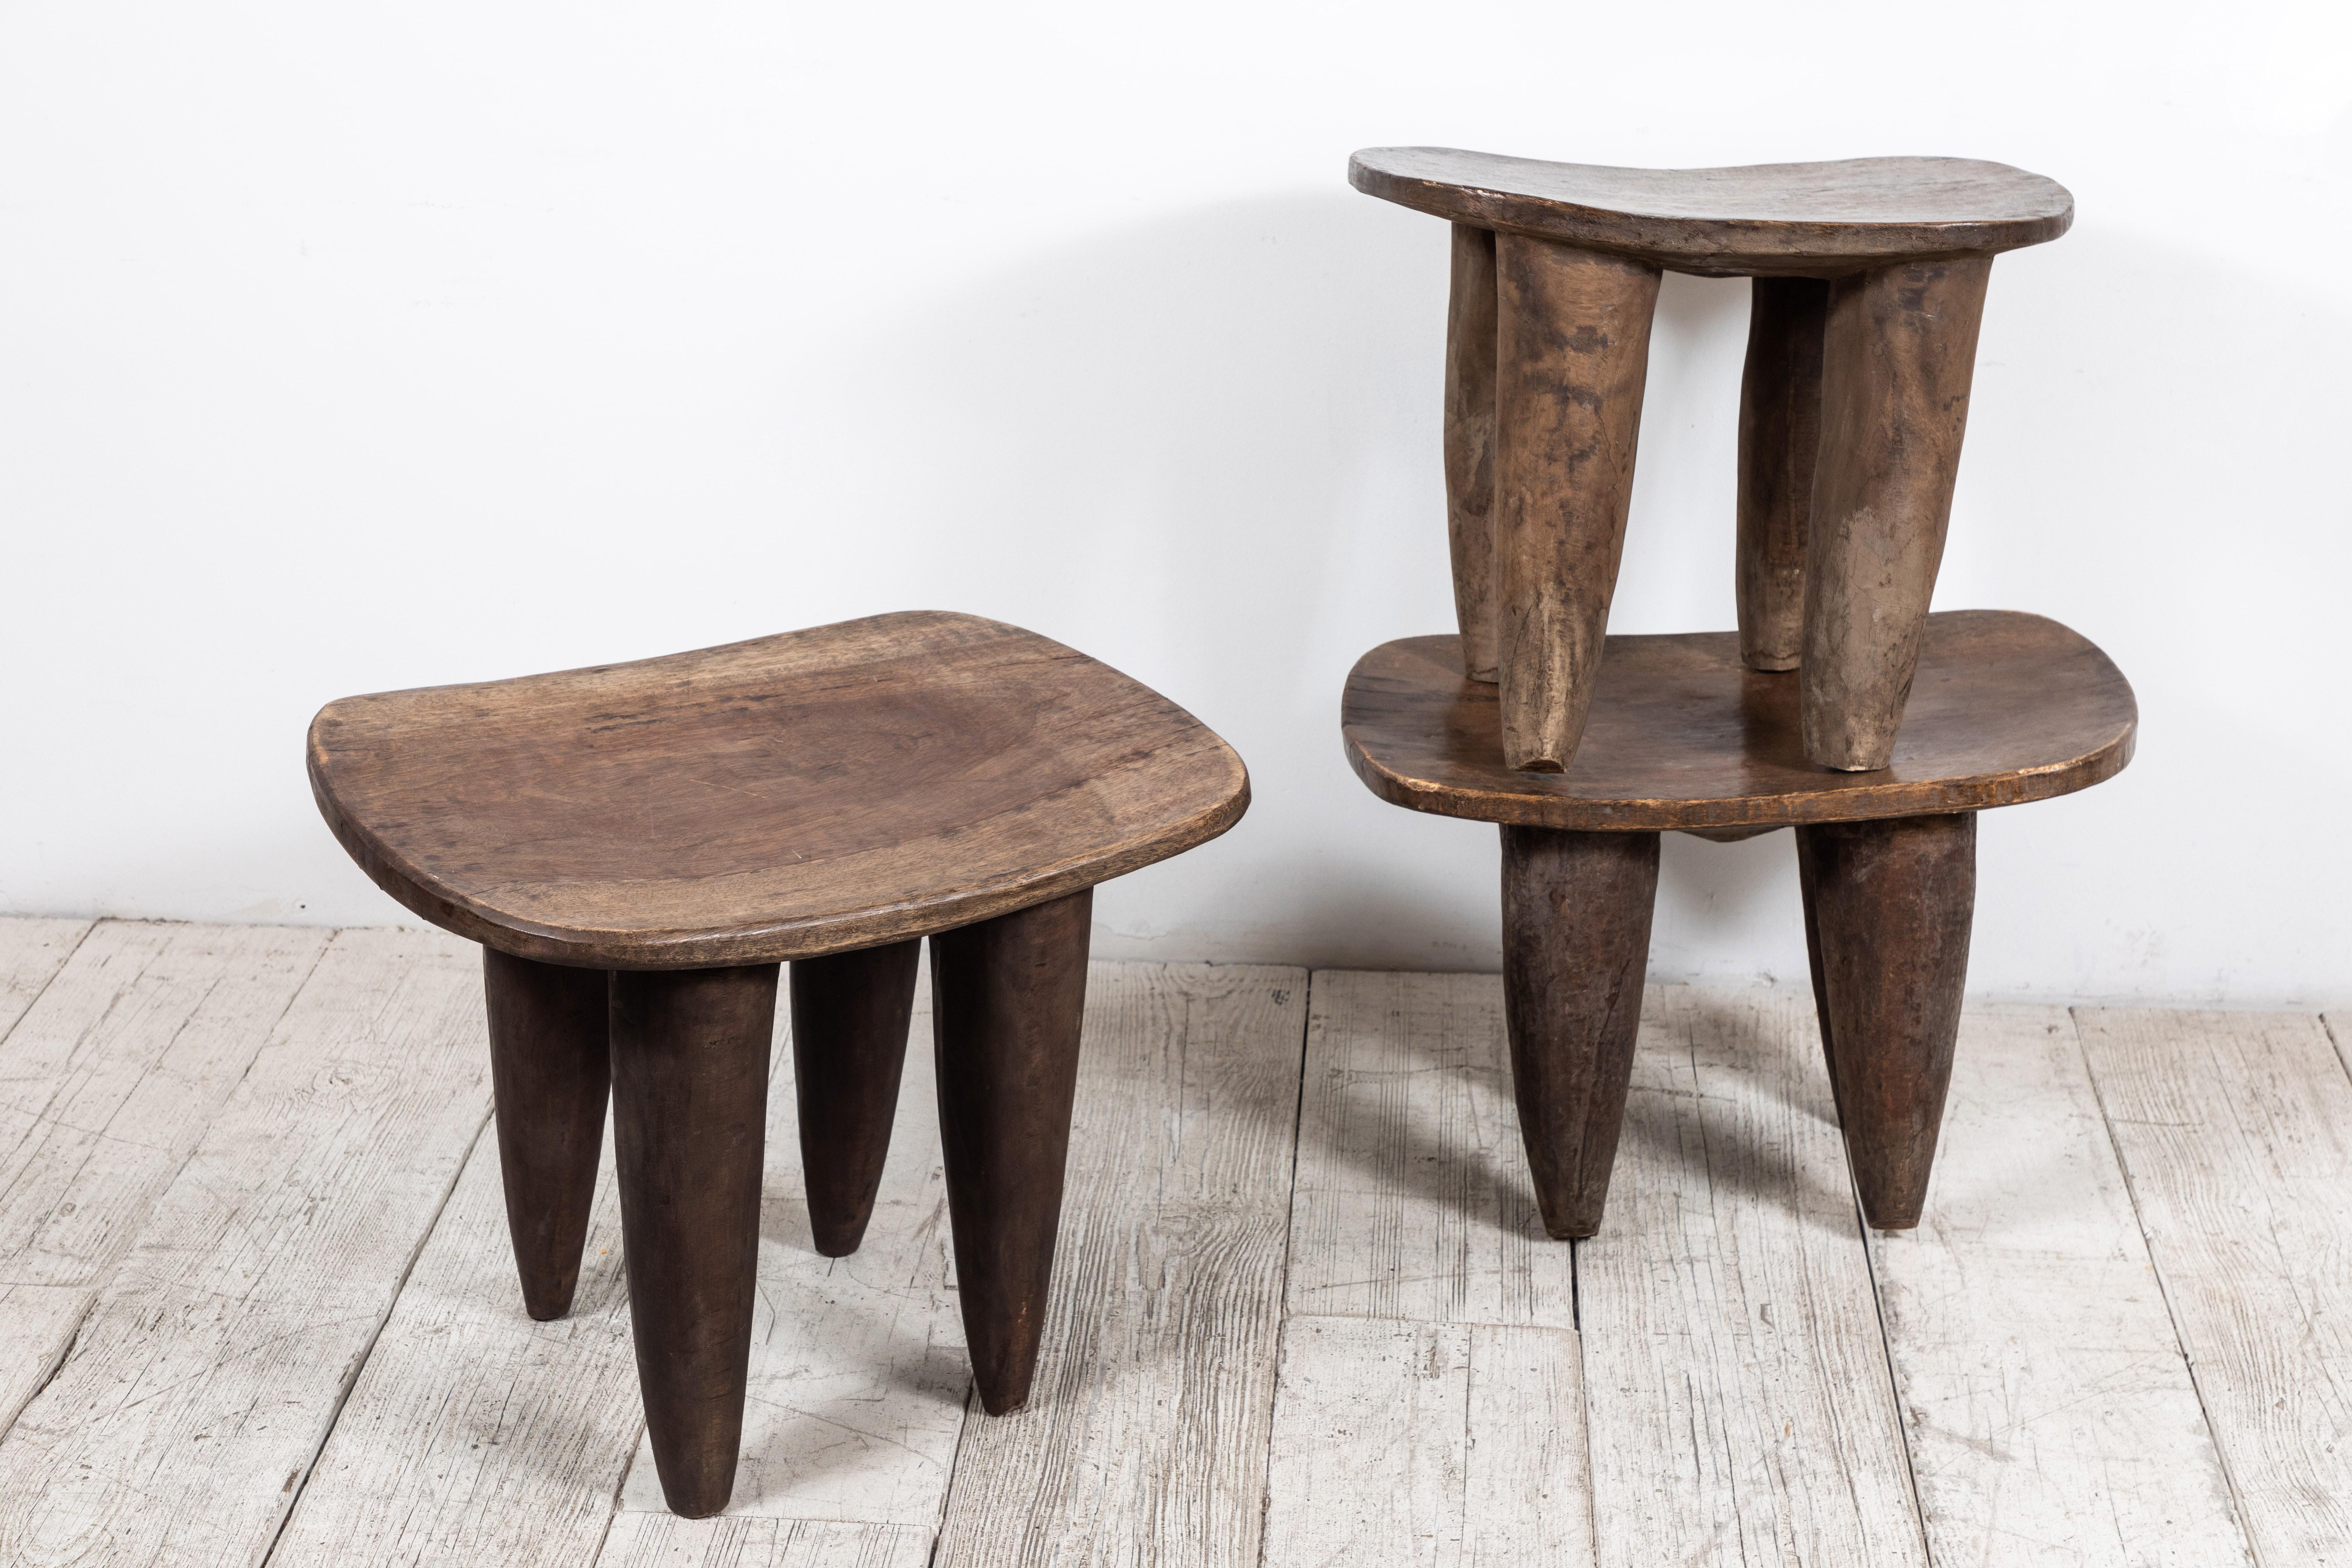 Vintage, hand carved iroko wood stool or small table from the Senufo tribe in Mali, Africa. Soft and smooth patina. Comfortable to sit on or perfect as a side table. 

Each stool has slightly varied measurements.